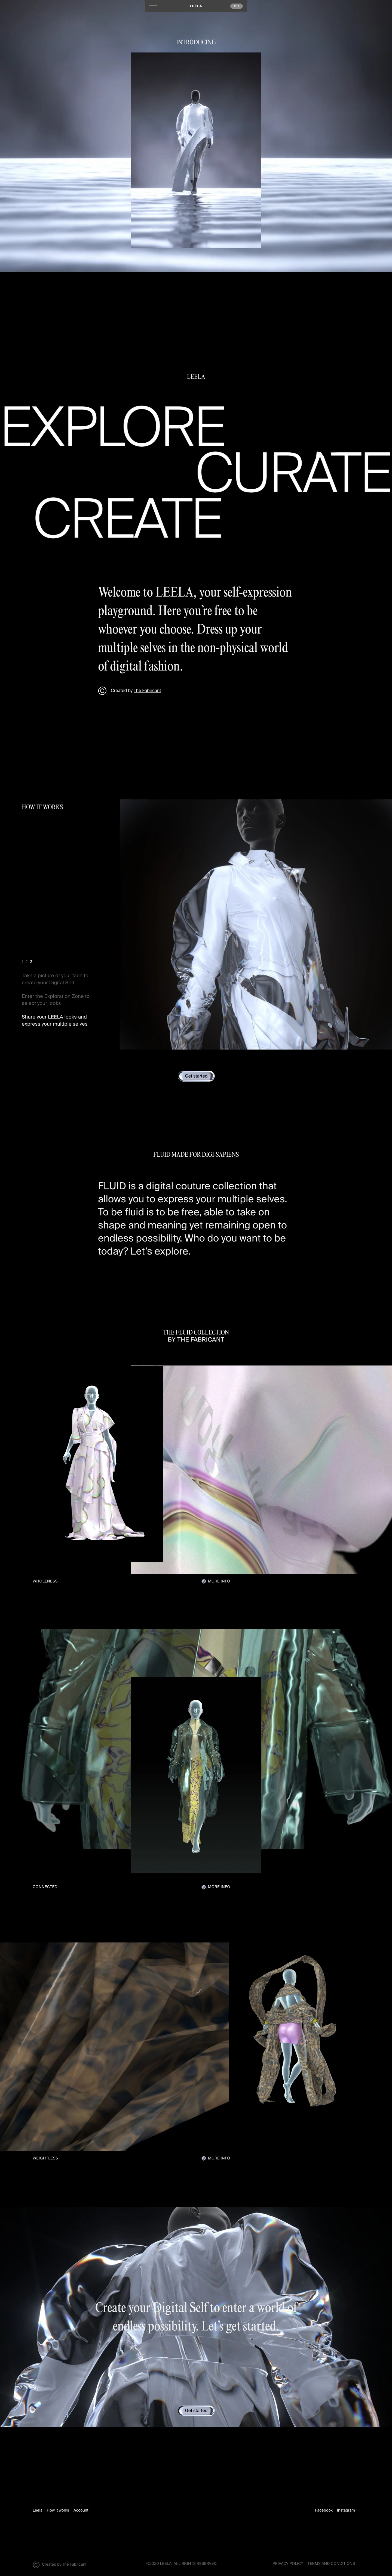 Leela Landing Page Example: Welcome to LEELA, your self-expression playground. Here you’re free to be whoever you choose. Dress up your multiple selves in the non-physical world of digital fashion.